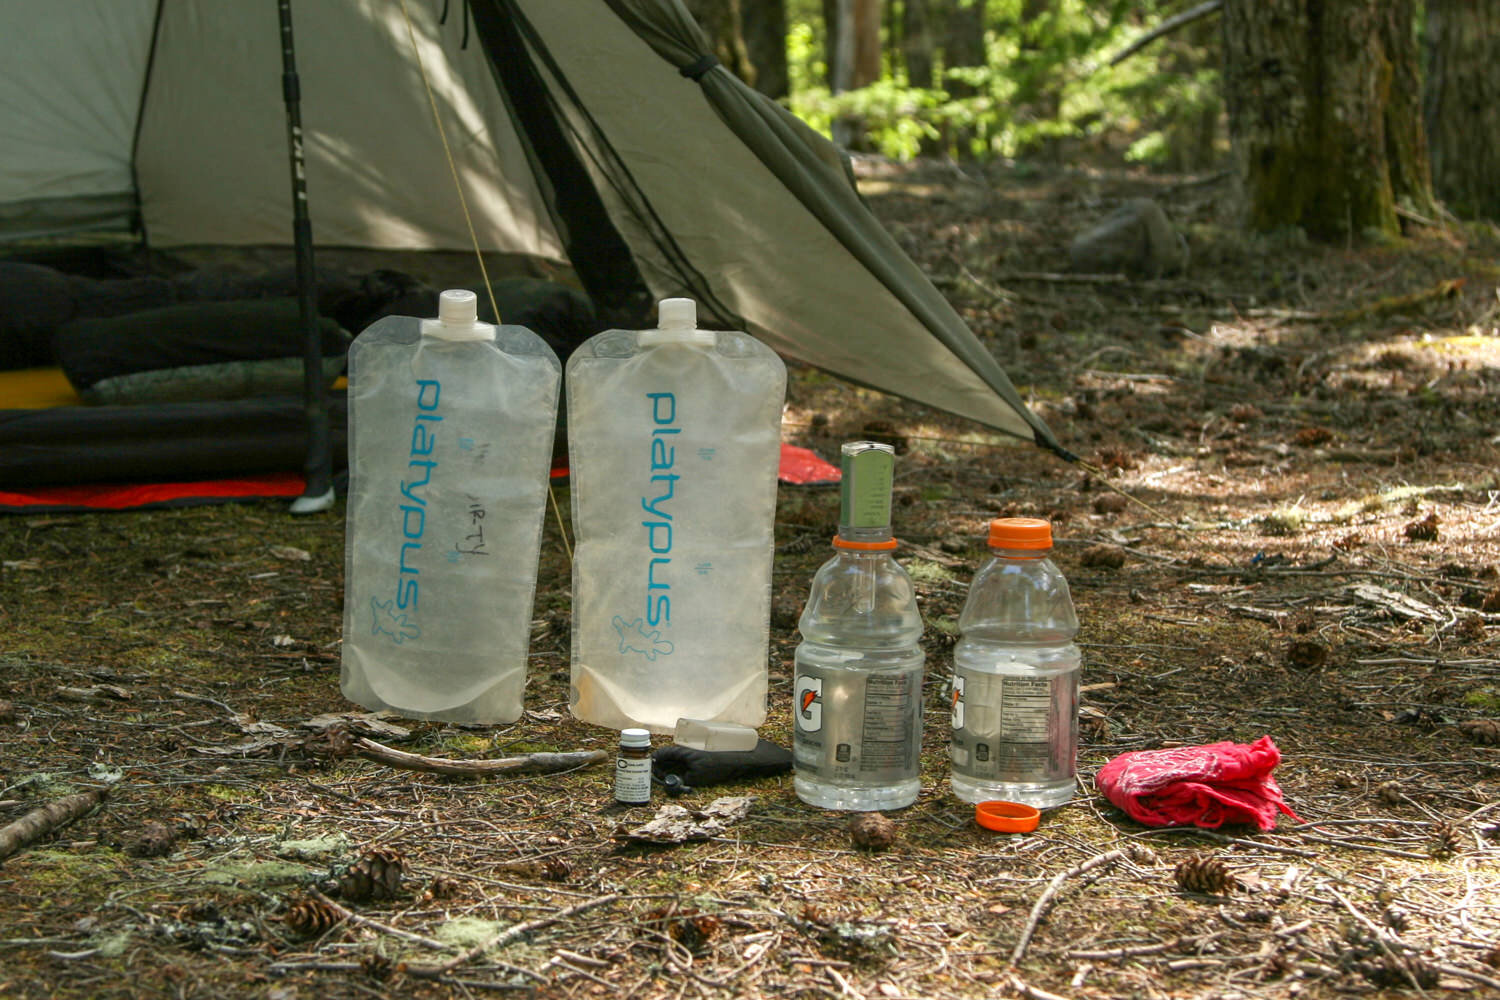 Platy Bottles are great for storing extra water on dry stretches of trail.